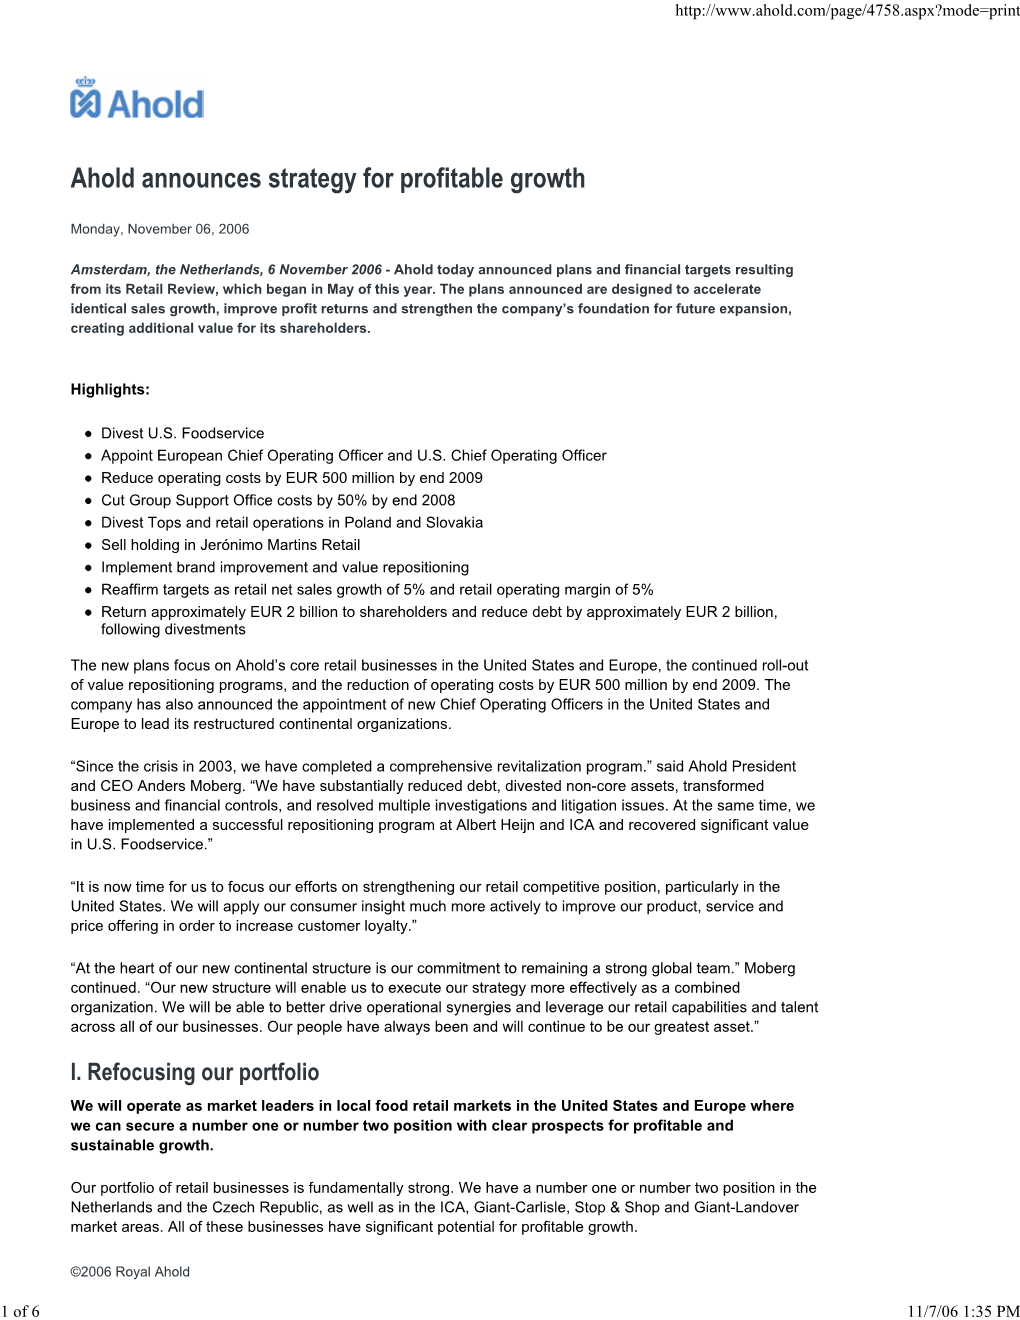 Ahold Announces Strategy for Profitable Growth